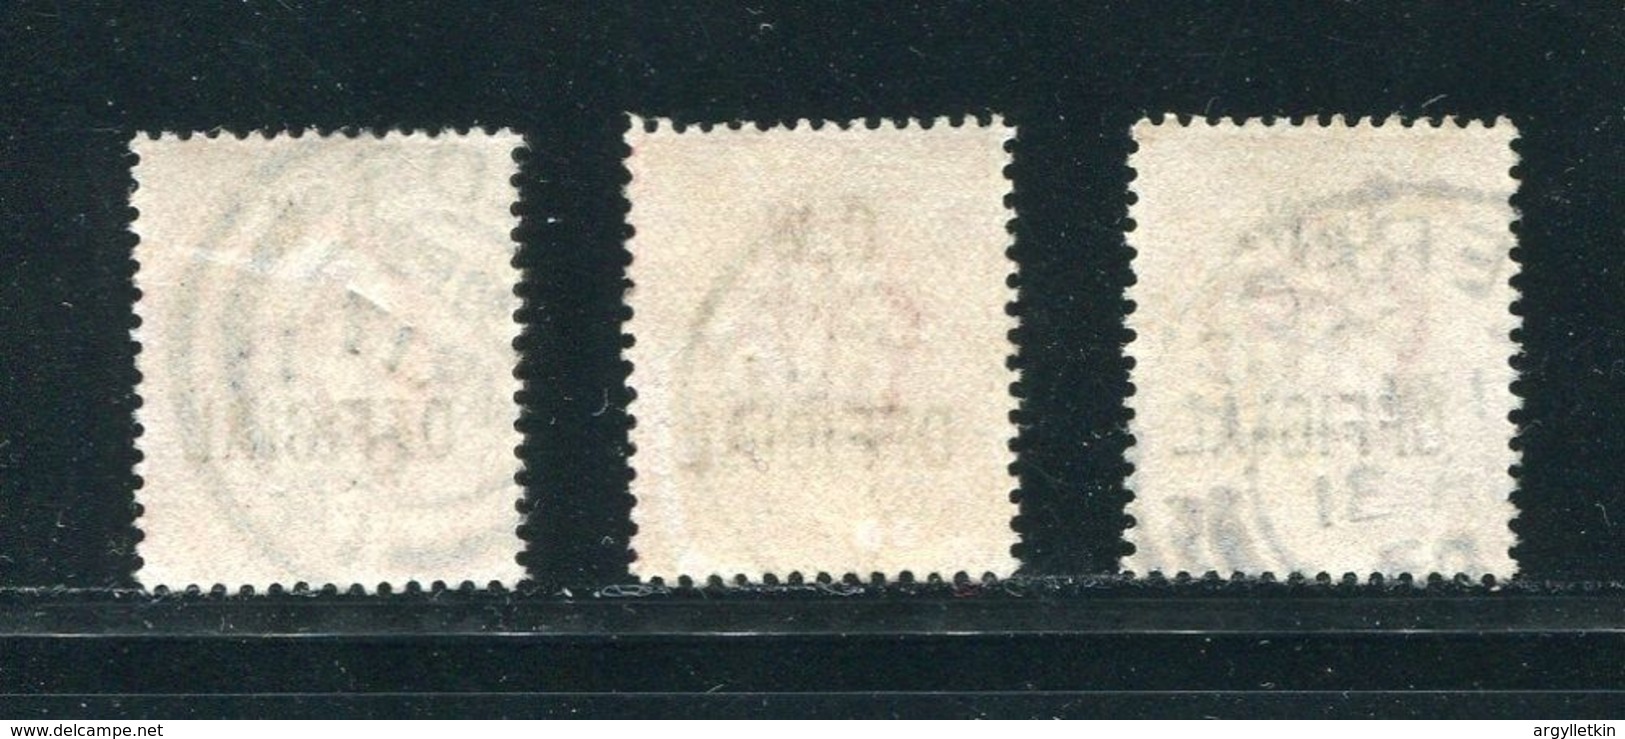 GB KING EDWARD 7TH OFFICIAL STAMPS O.W. OFFICIAL LEEDS LIVERPOOL - Unclassified